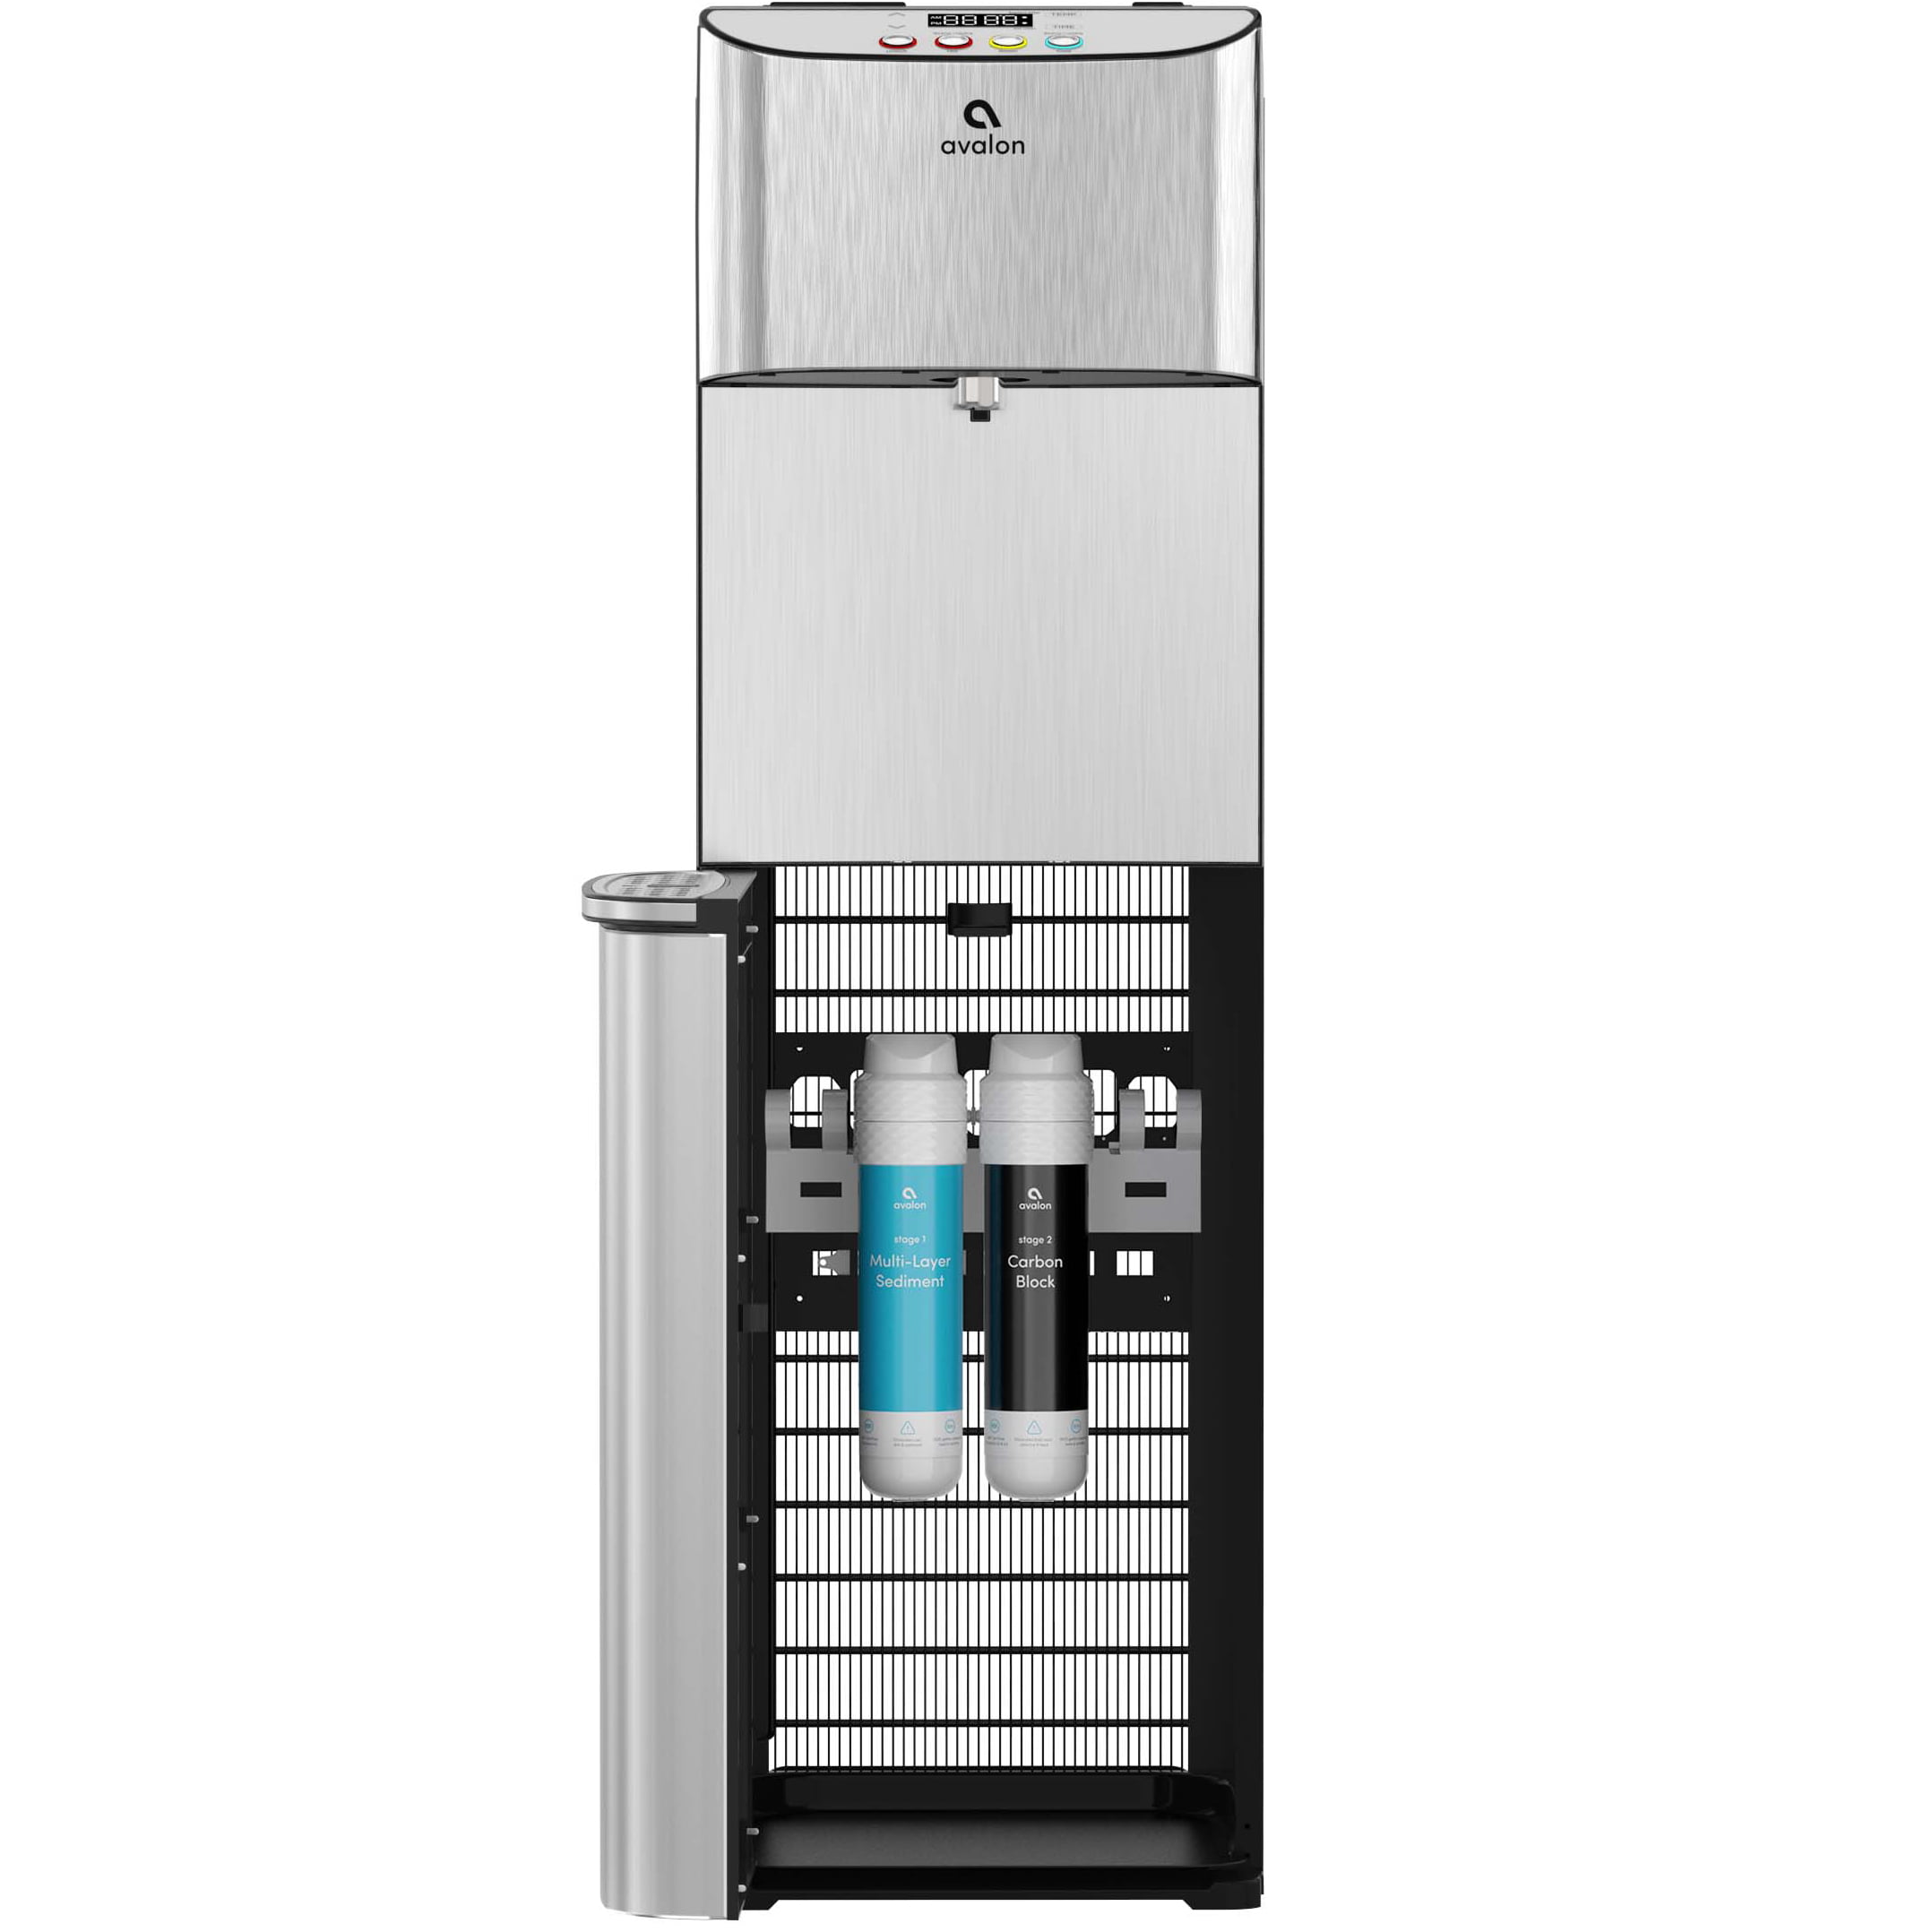  Avalon Self Cleaning Bottleless Water Cooler Water Dispenser -  3 Temperature Settings - Hot, Cold & Room Water, Durable Stainless Steel  Cabinet, NSF Certified Filter- UL Listed: Home & Kitchen